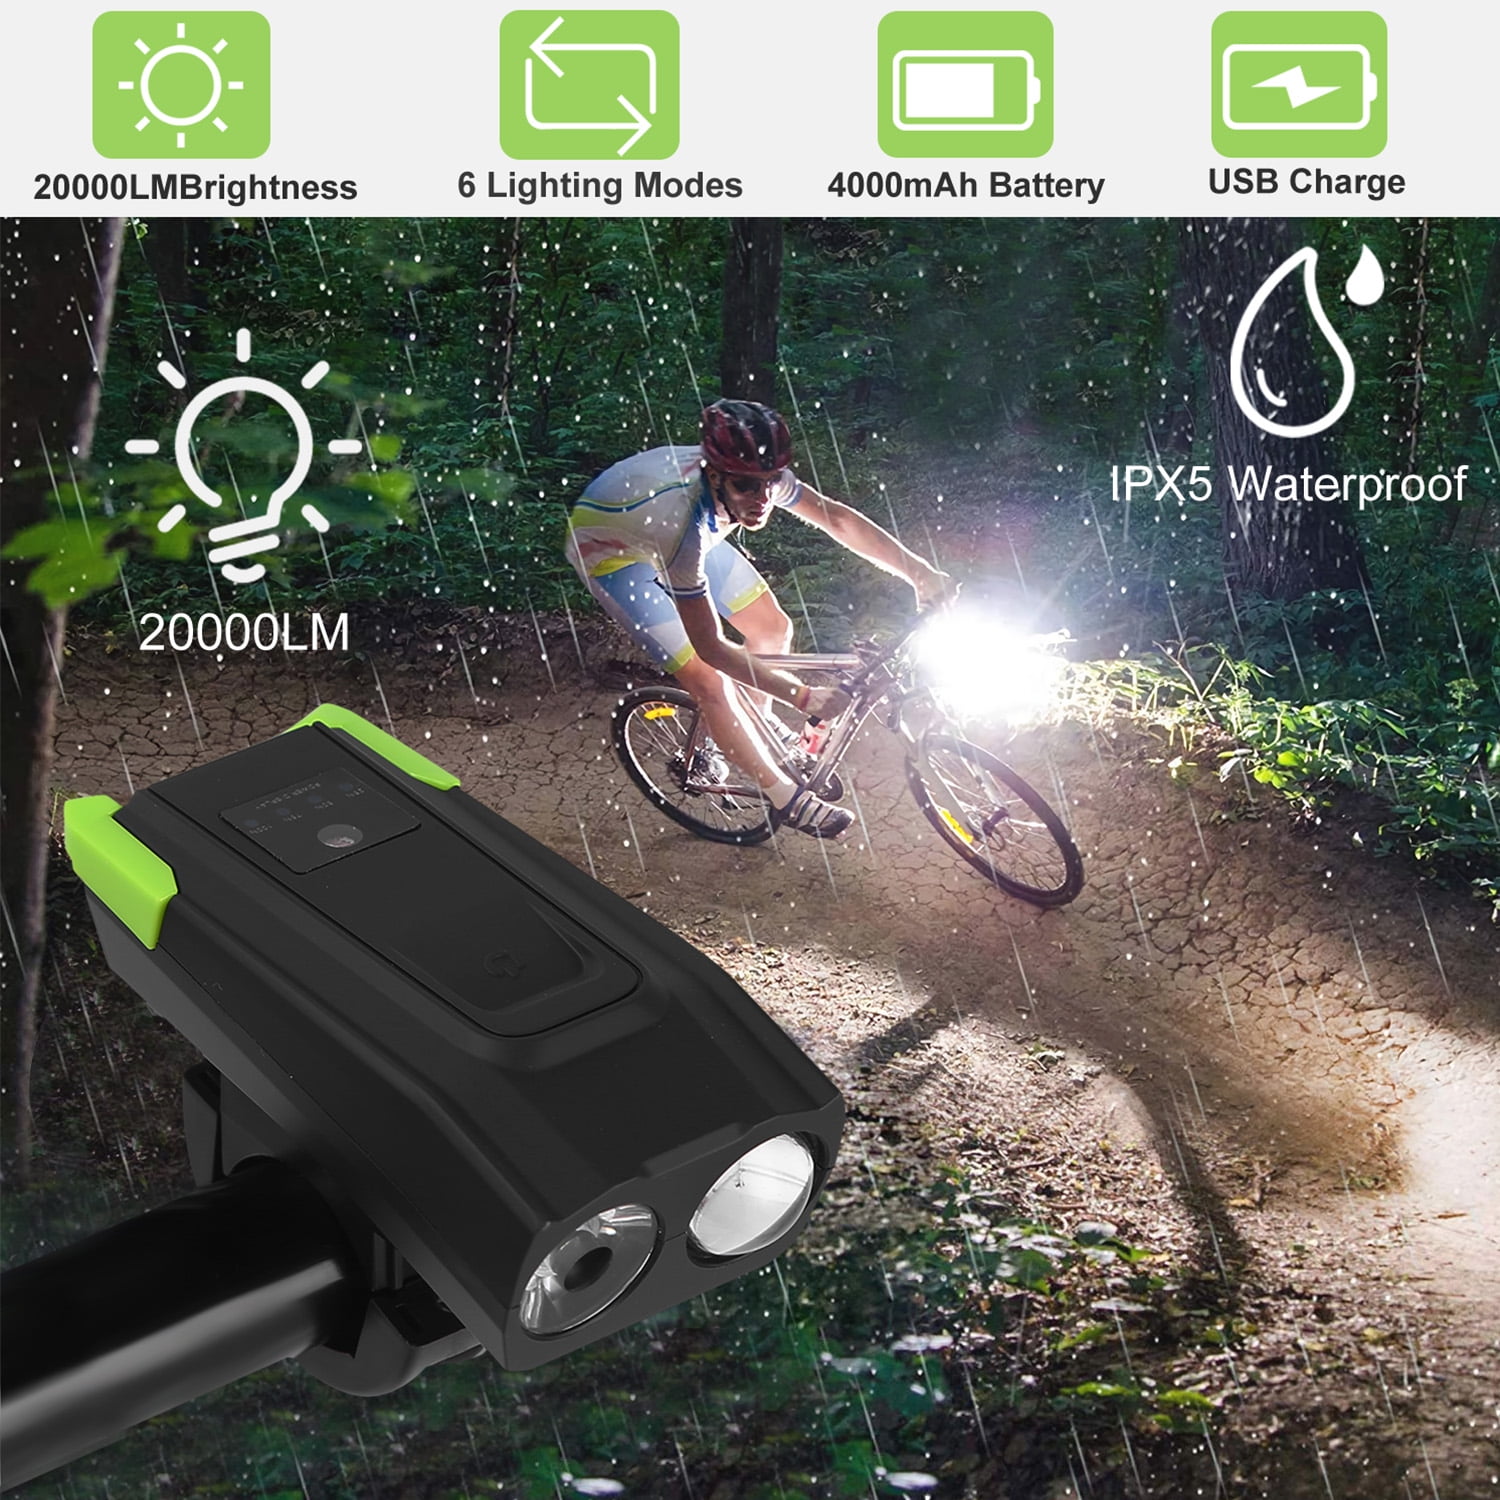 Details about   Waterproof Super Bright LED Bike Bicycle Light Headlight 120DB Dell Rechargeable 